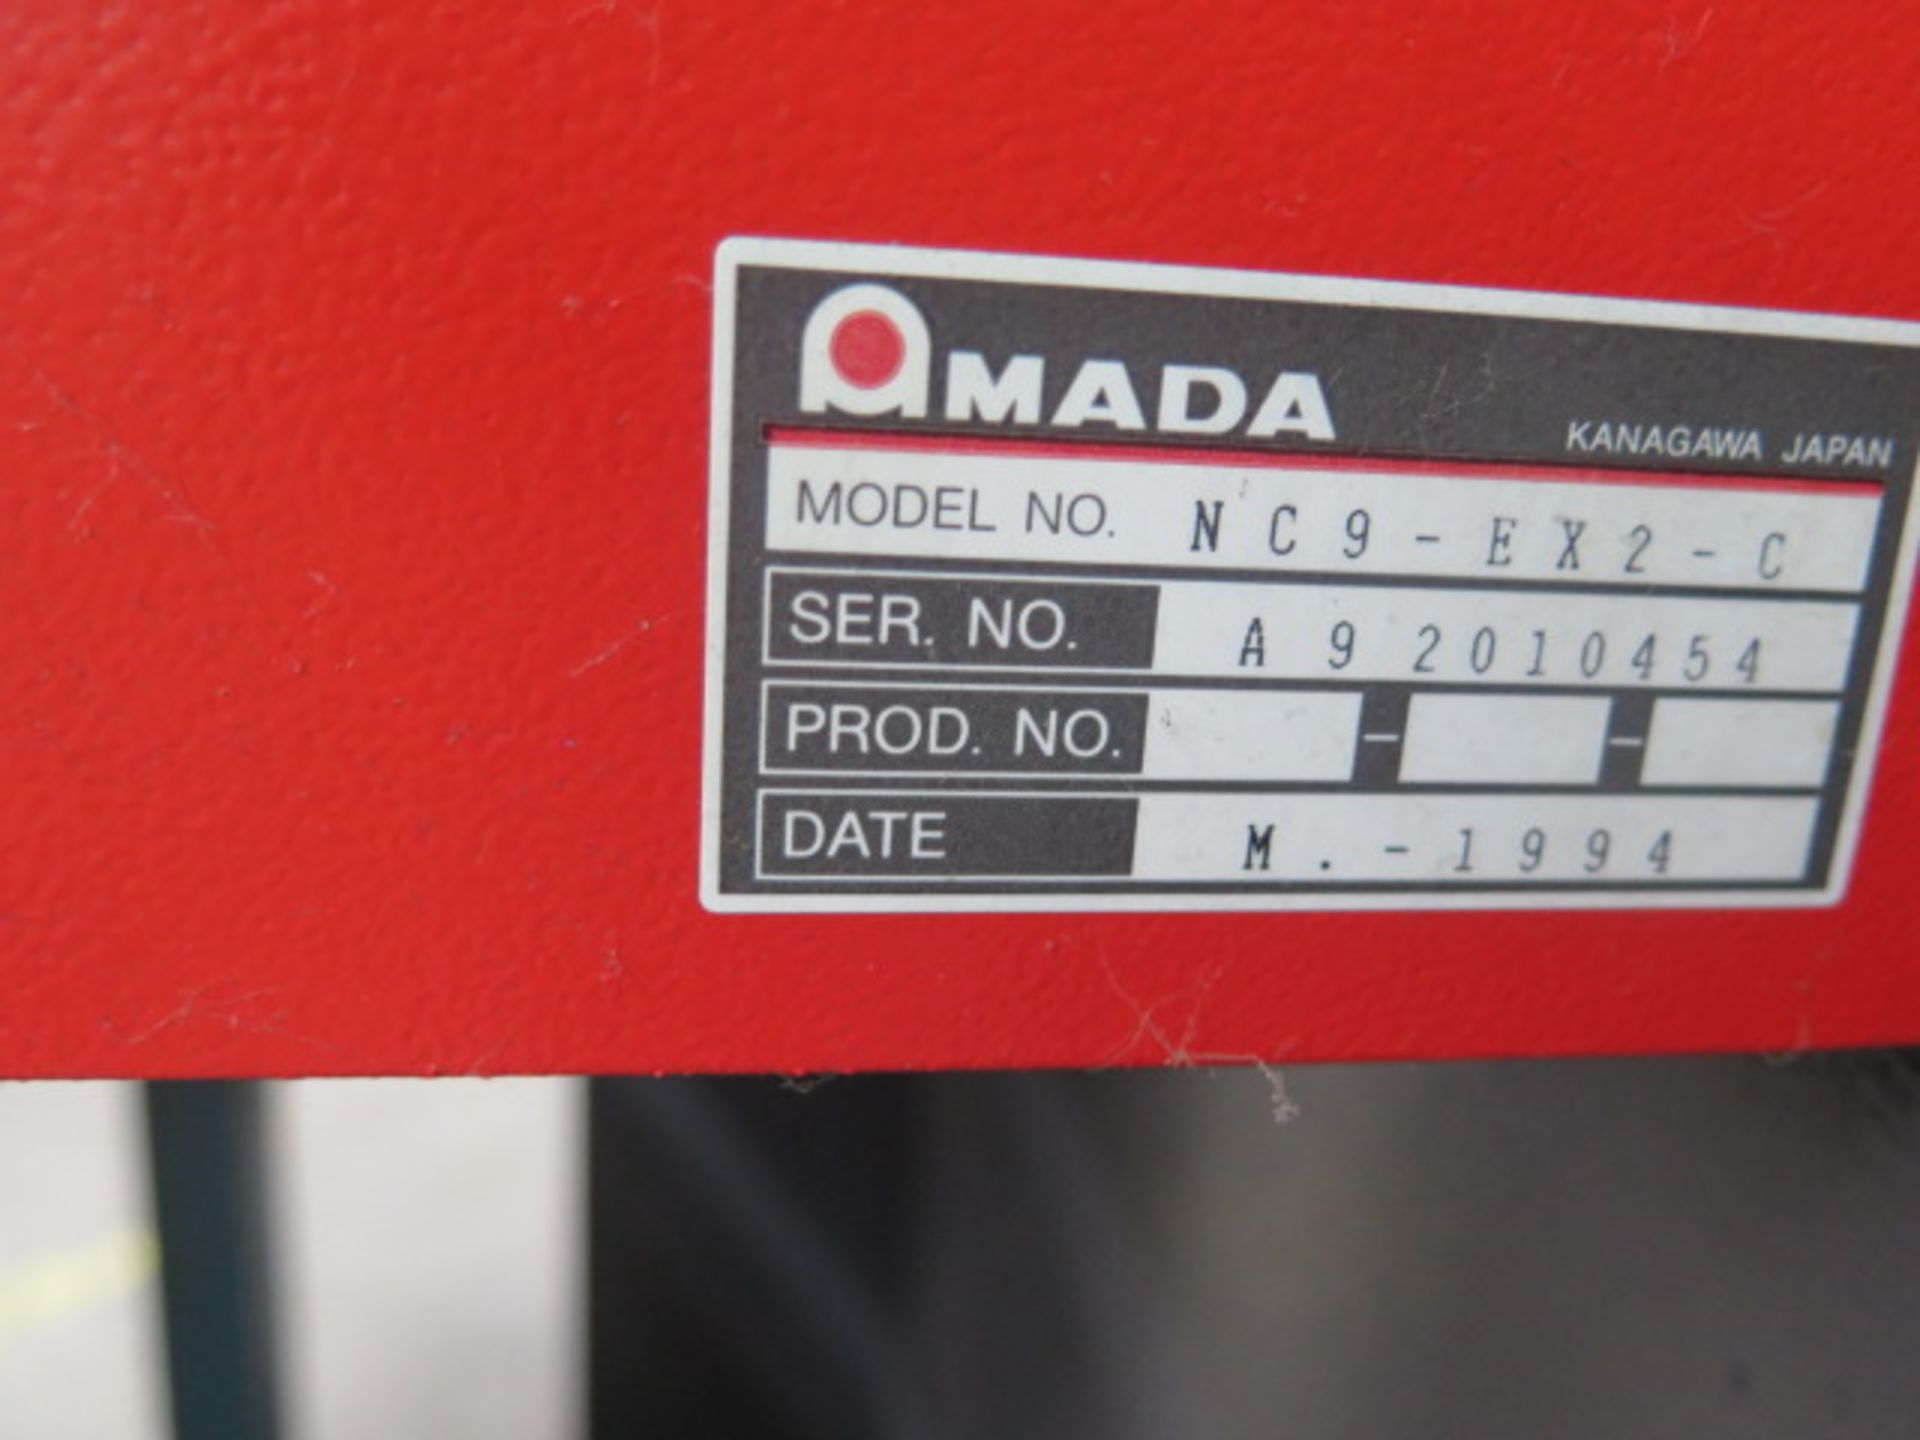 Amada RG100 100 Ton x 10’ CNC Press Brake s/n 105240 w/ NC9-EX II 3 AXIS Controls, SOLD AS IS - Image 18 of 20